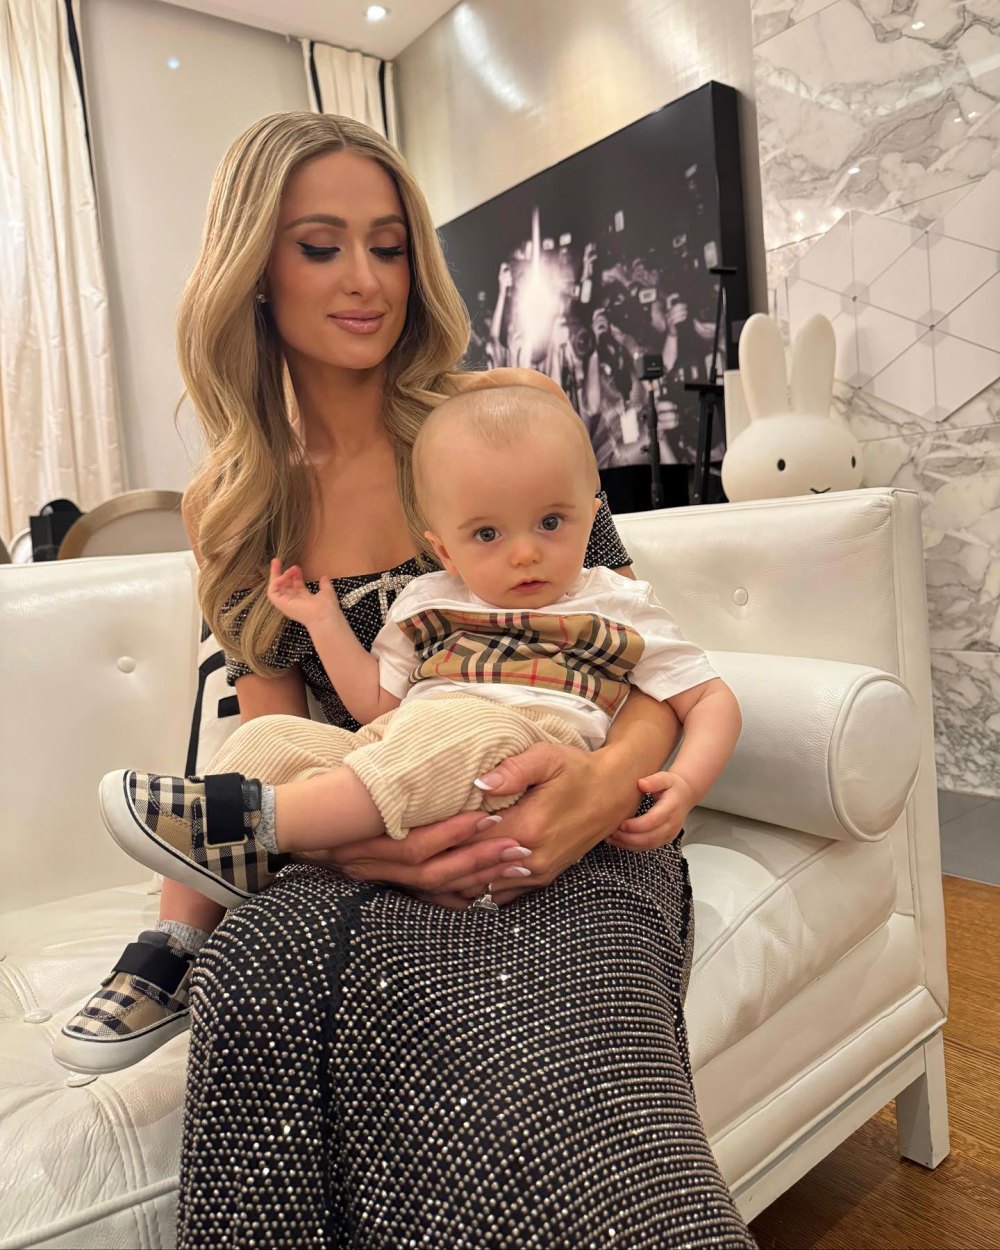 Paris Hilton Reacts to Criticism of ‘Perfectly Healthy’ Baby’s Large Head: ‘Sick People’